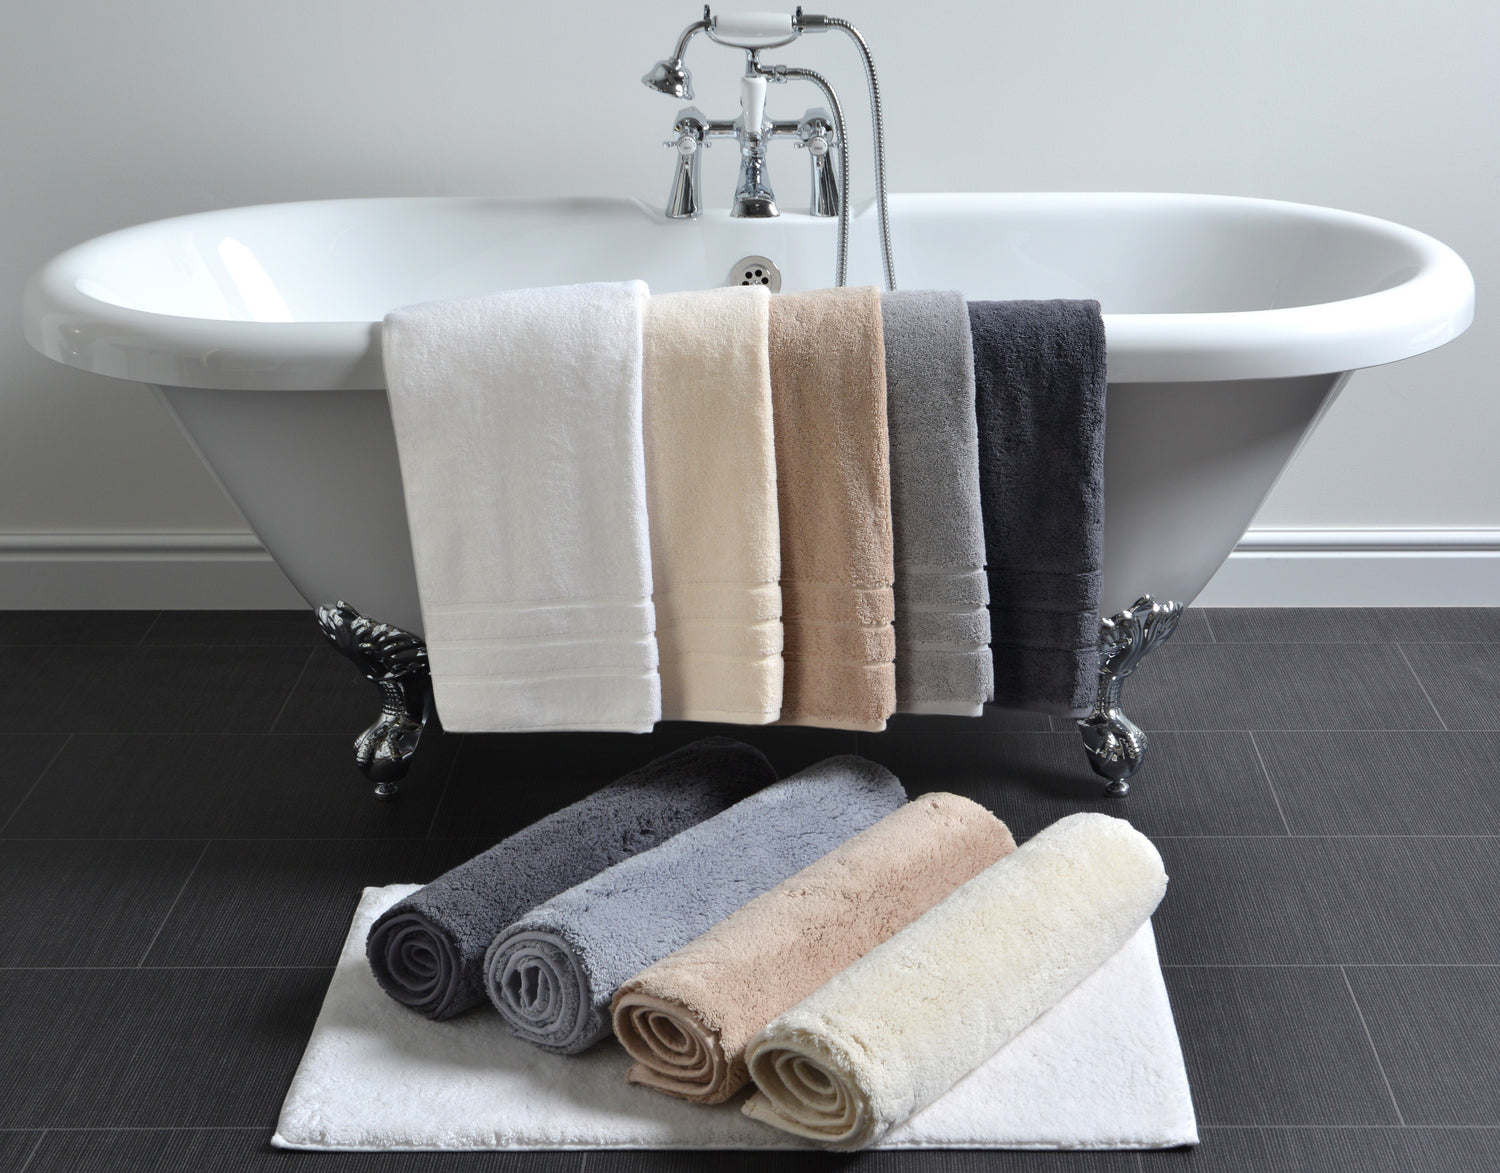 thick towels and bath mats around traditional bathtub